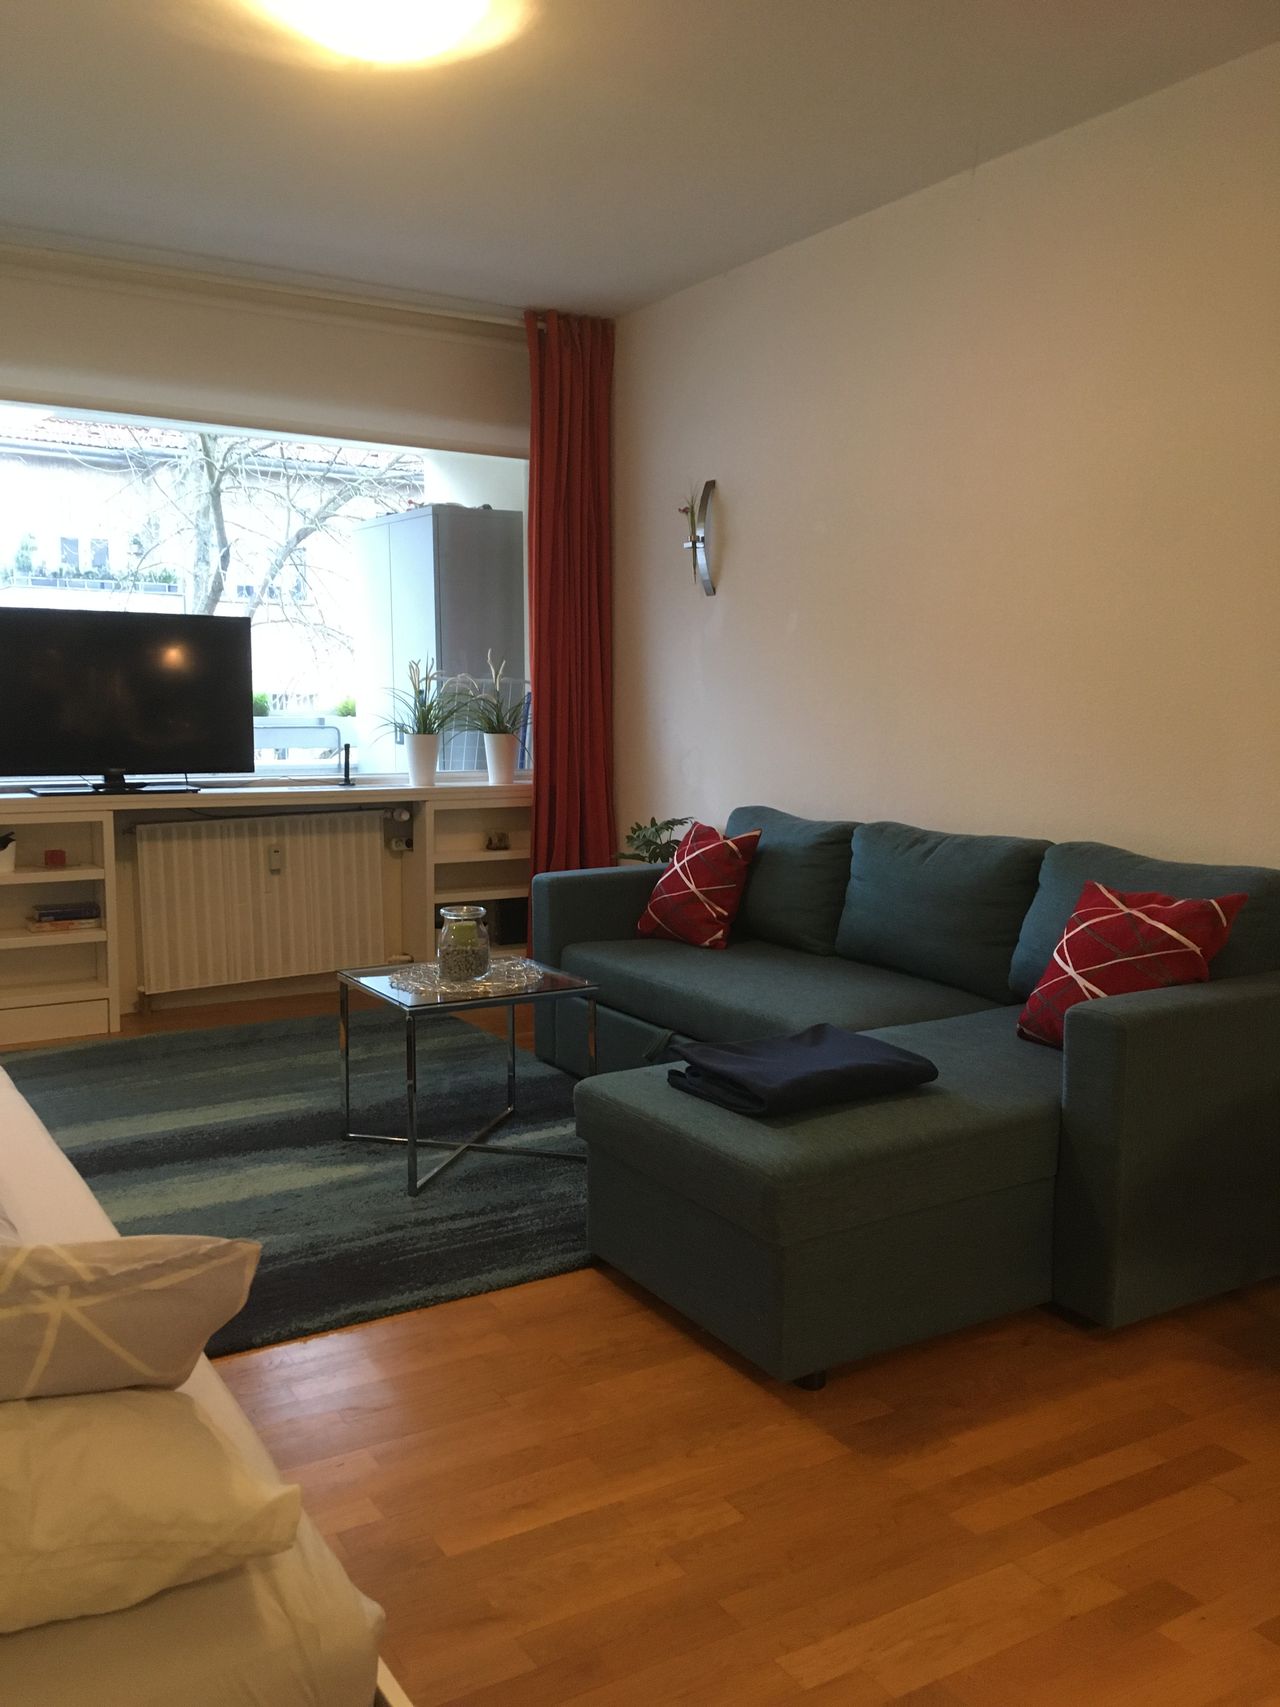 Beautiful 1-room-apartment with balcony (close to Schoeneberg)